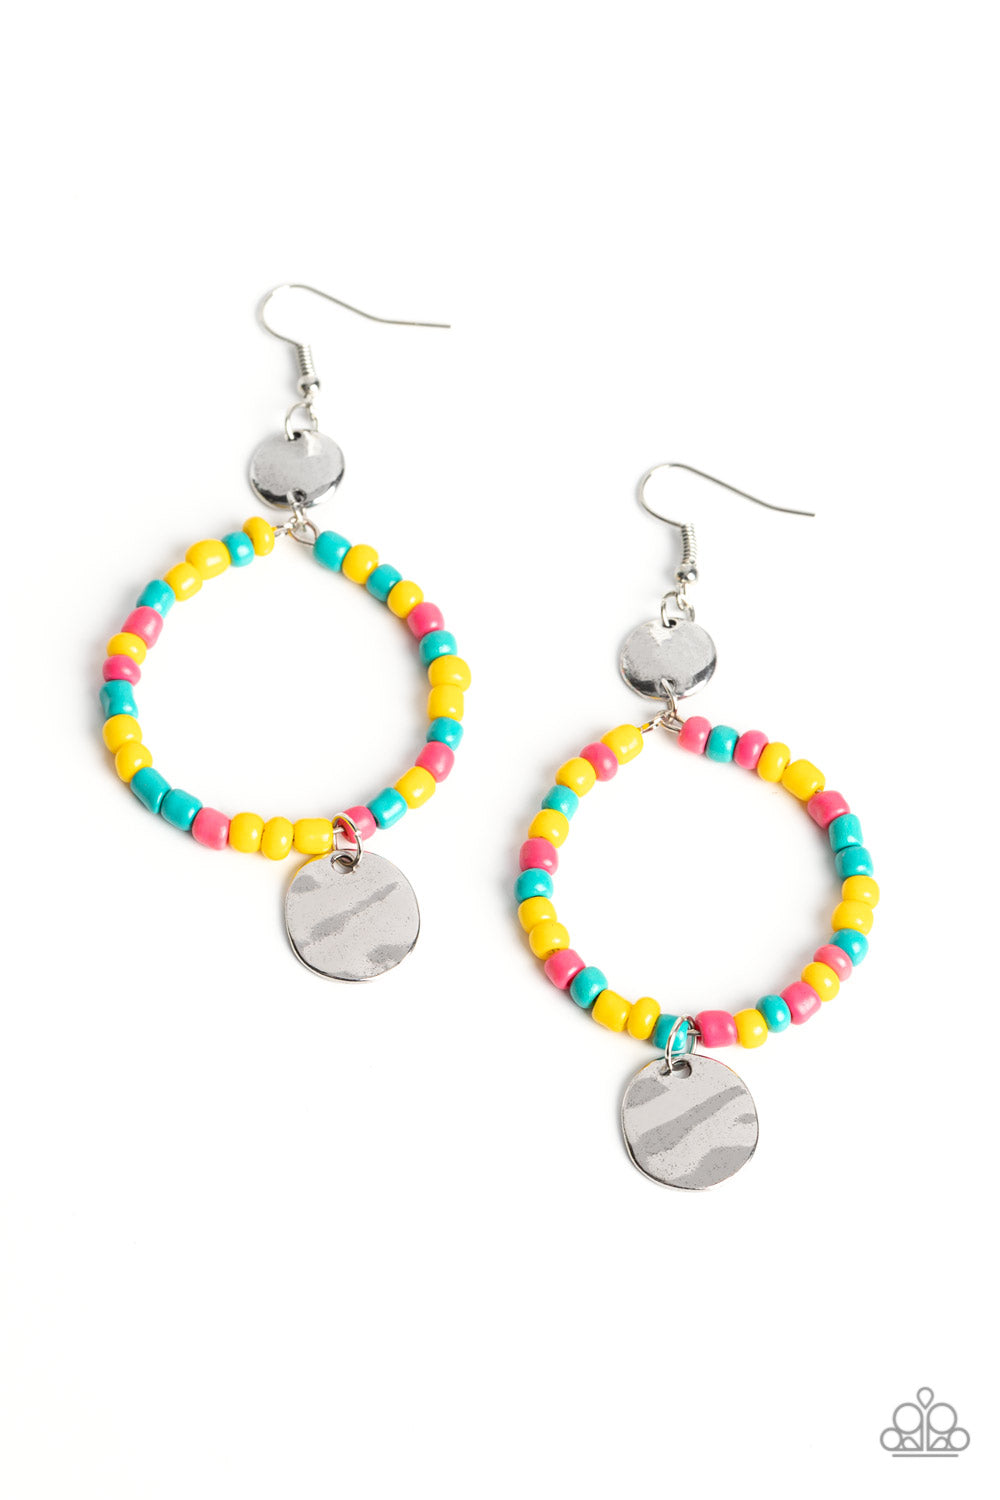 Cayman Catch - Yellow Multi Colorful Earrings - Paparazzi Accessories - Featuring the summery hues of Empire Yellow, Beetroot Purple, and Harbor Blue, dainty seed beads are threaded along a wire hoop that swings between two hammered silver discs for a tropical inspired fashion. Earring attaches to a standard fishhook fitting. Sold as one pair of earrings.